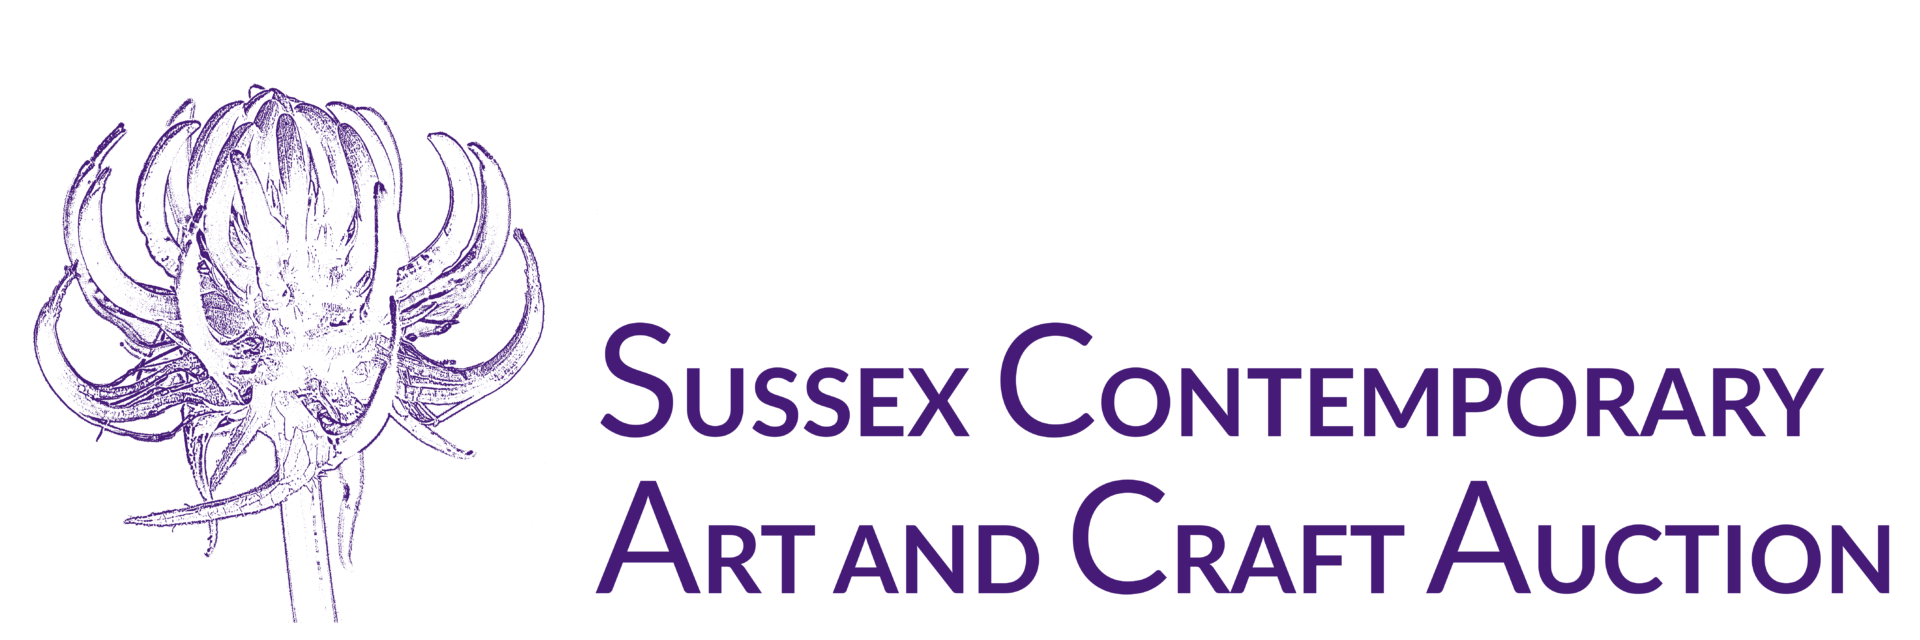 Sussex Contemporary Art and Craft Auction